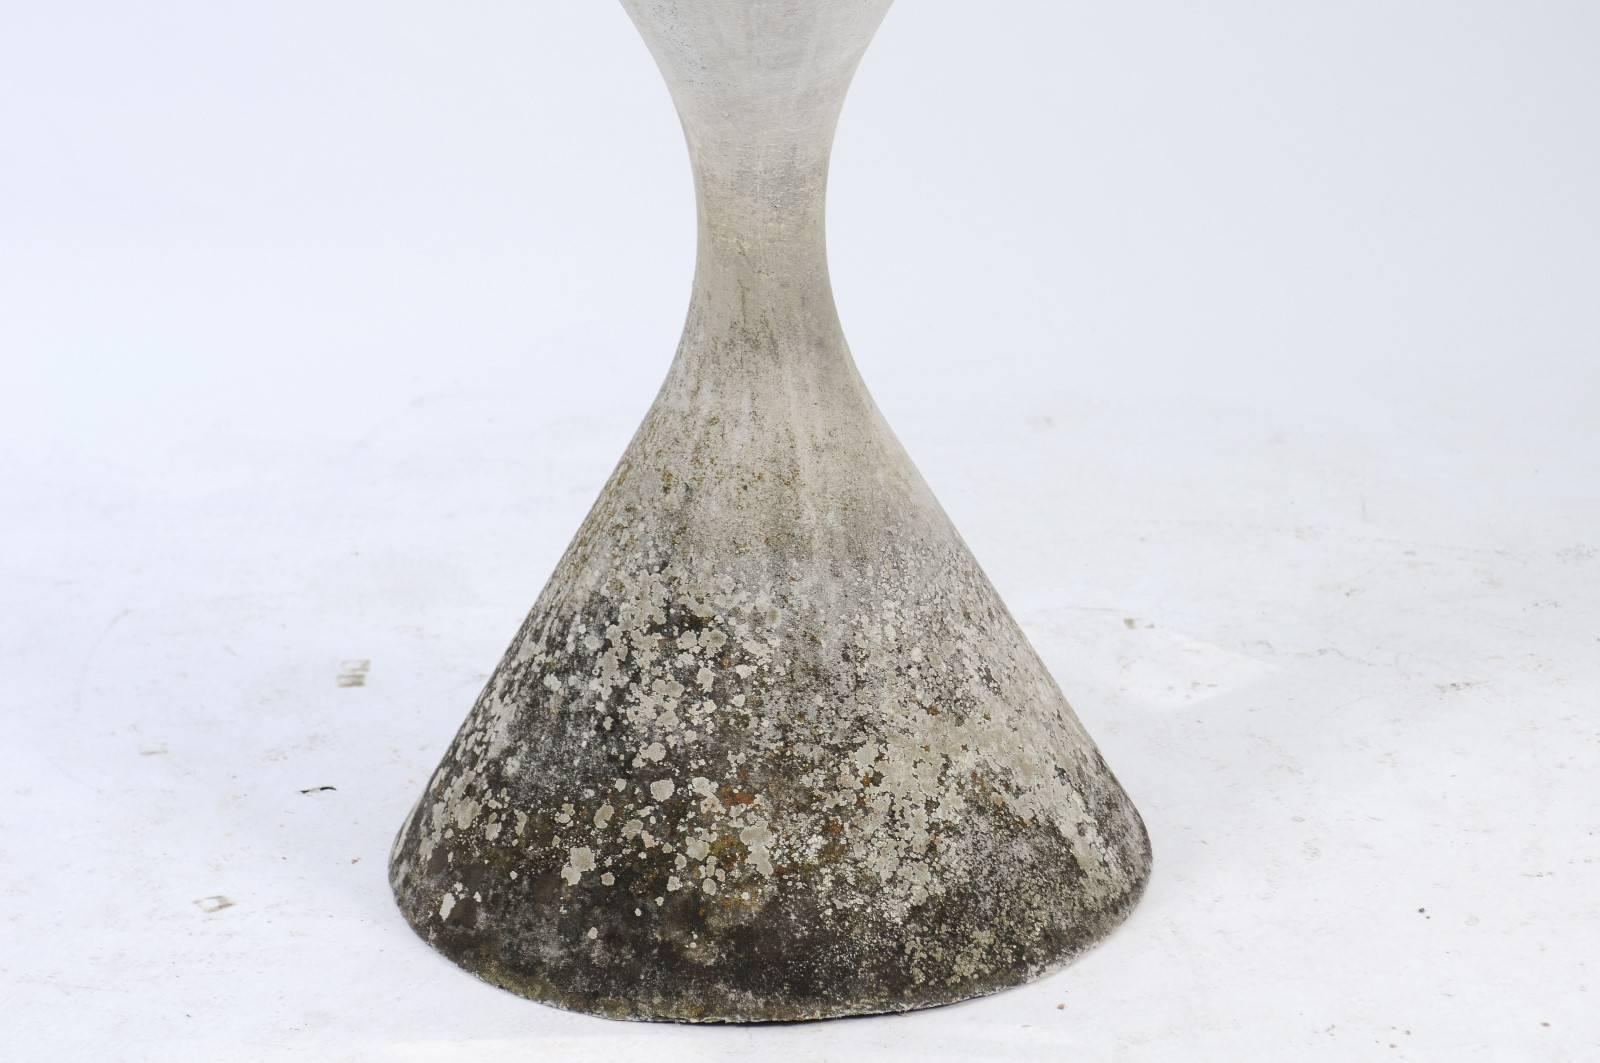 A Swiss vintage Willy Guhl fiber cement 'Diabolo' garden planter from the mid-20th century, originally from Lausanne. This hourglass shaped planter was born in Switzerland in the 1950s and was created by Willy Guhl and manufactured by Eternit. Its